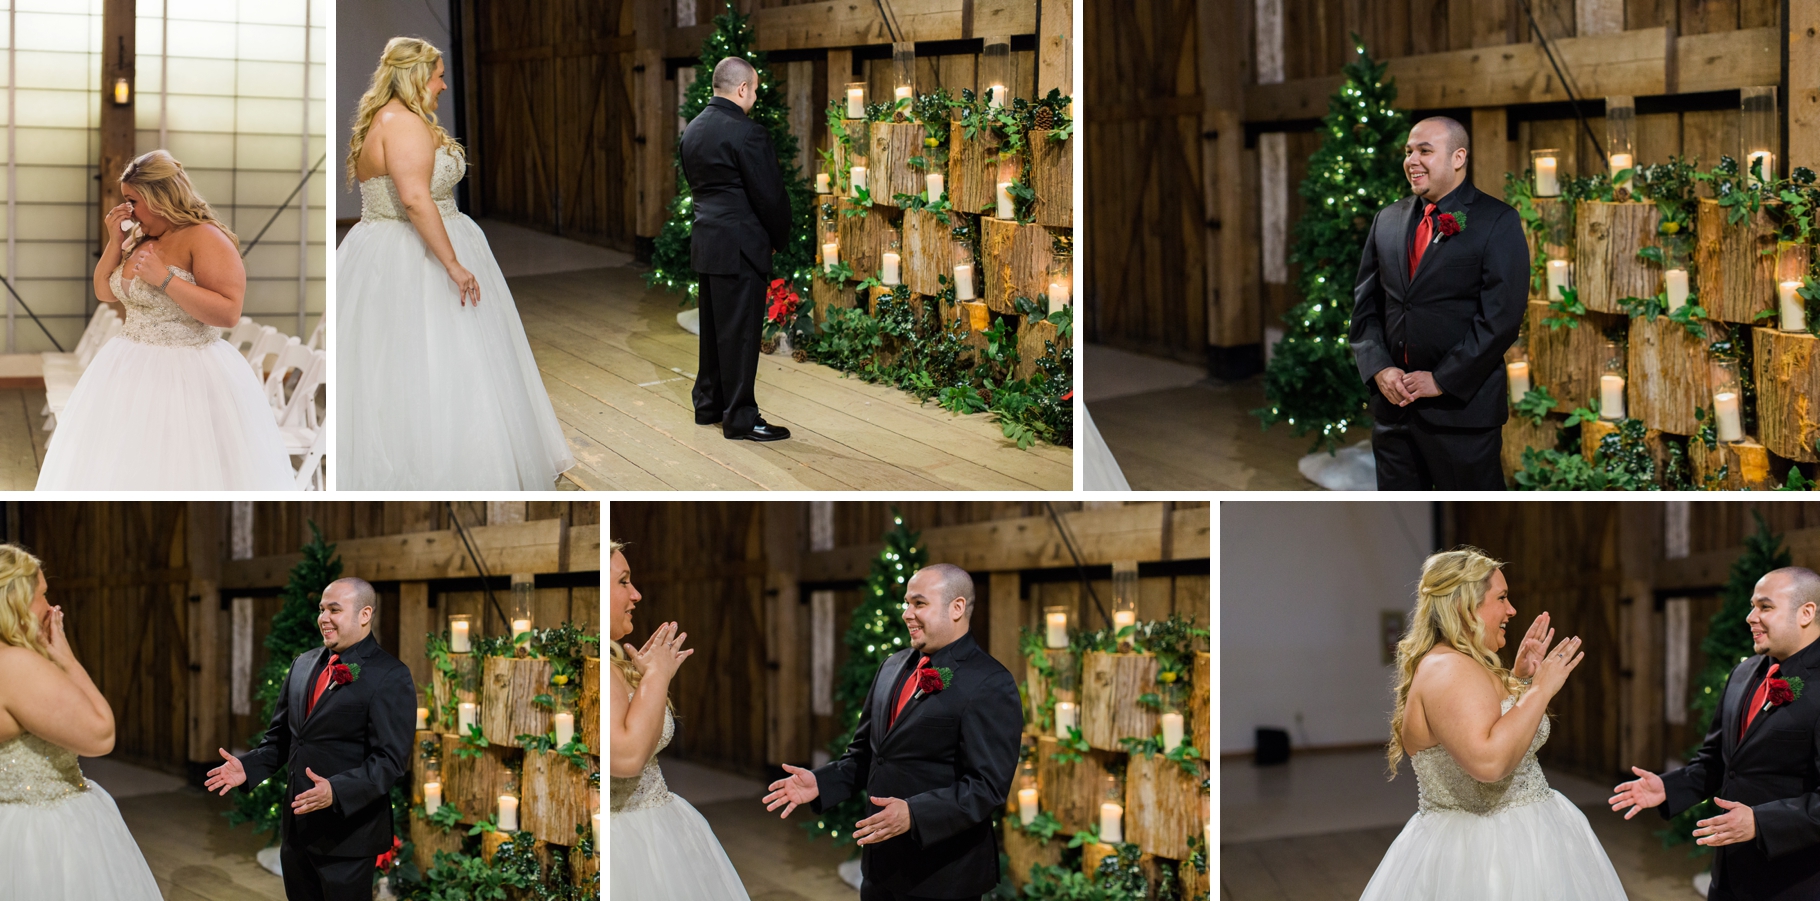 6-First-Look-Bride-Groom-Pickering-Barn-Issaquah-Winter-Wedding-Photographer-Seattle-Photography-by-Betty-Elaine